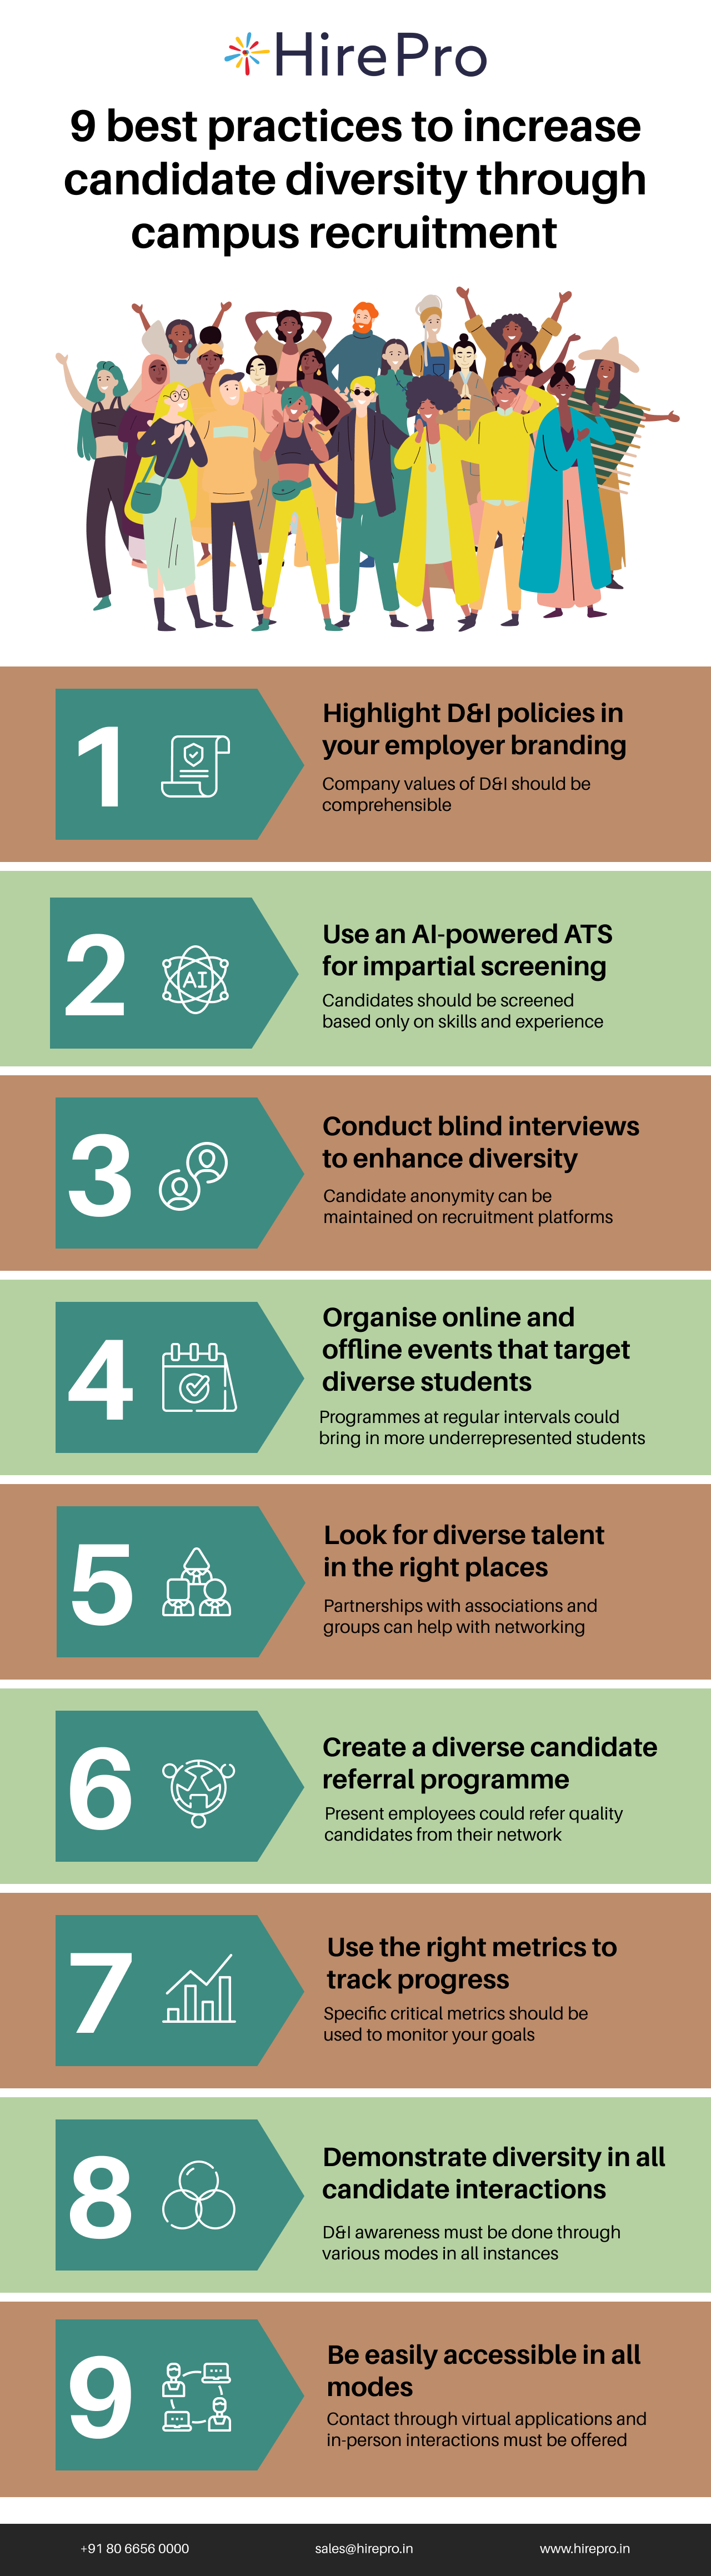 9 best practices to increase candidate diversity through campus recruitment